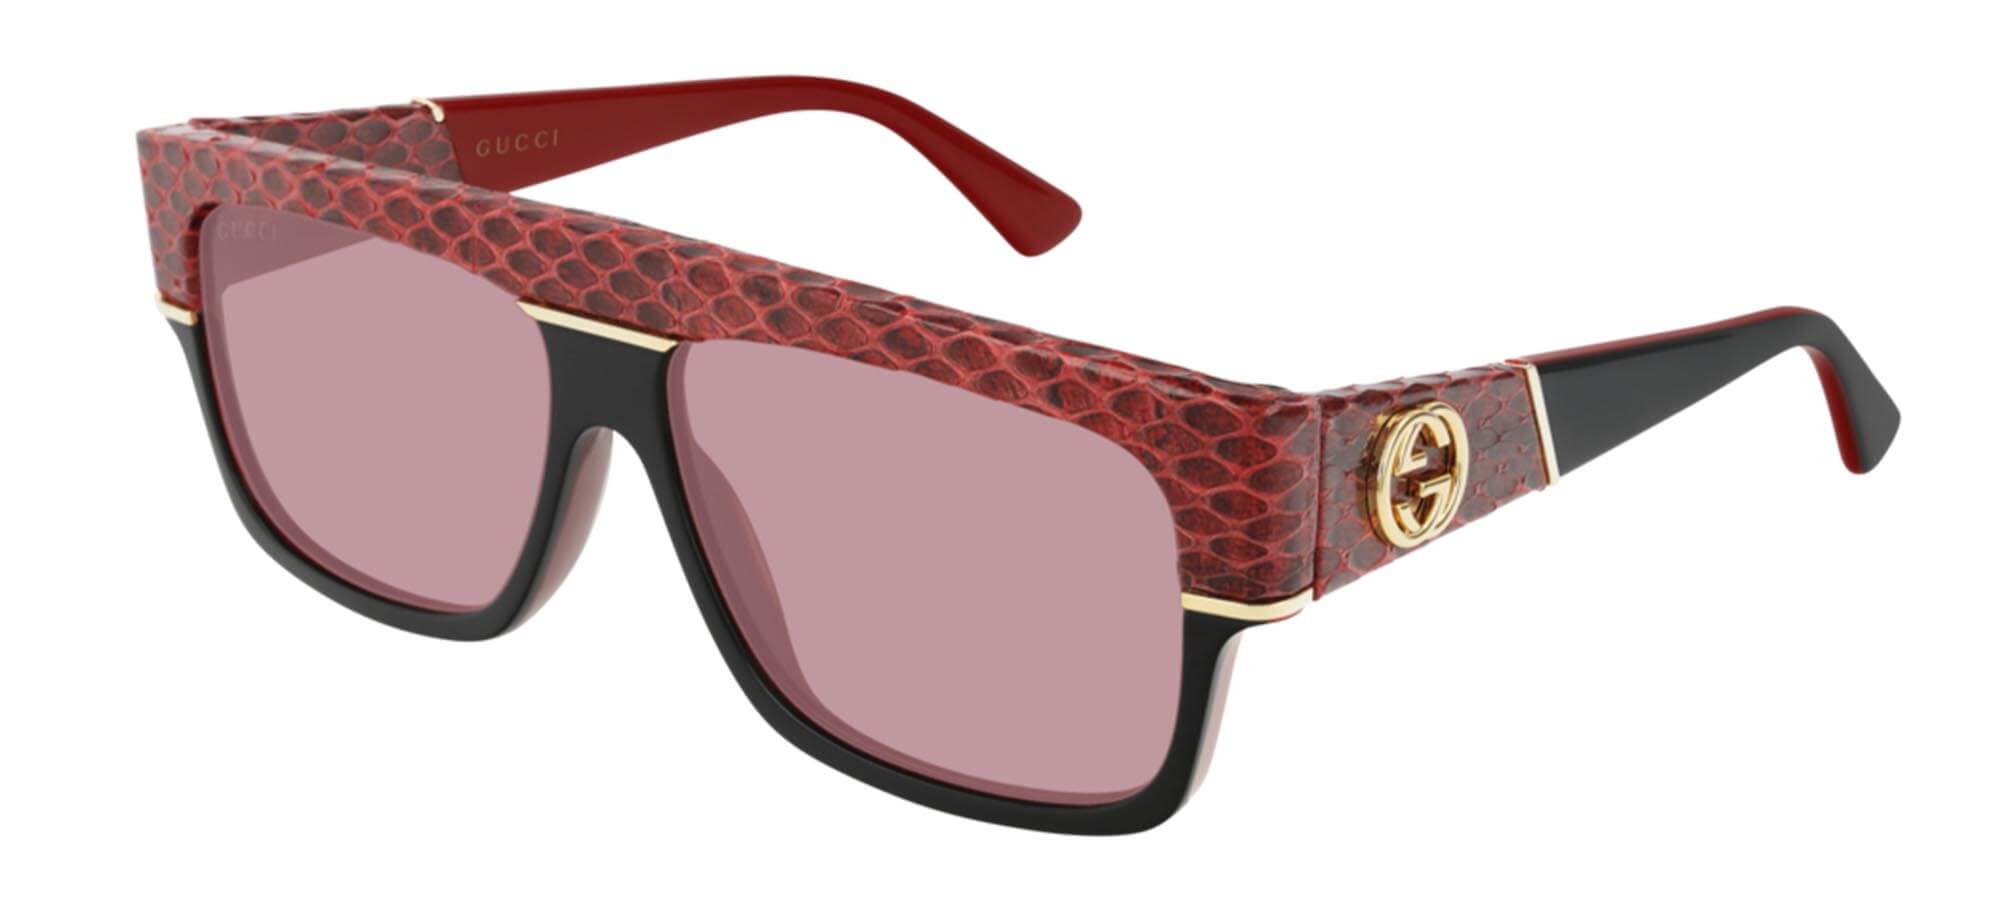 GucciGG0483SRed/red (004 RS)